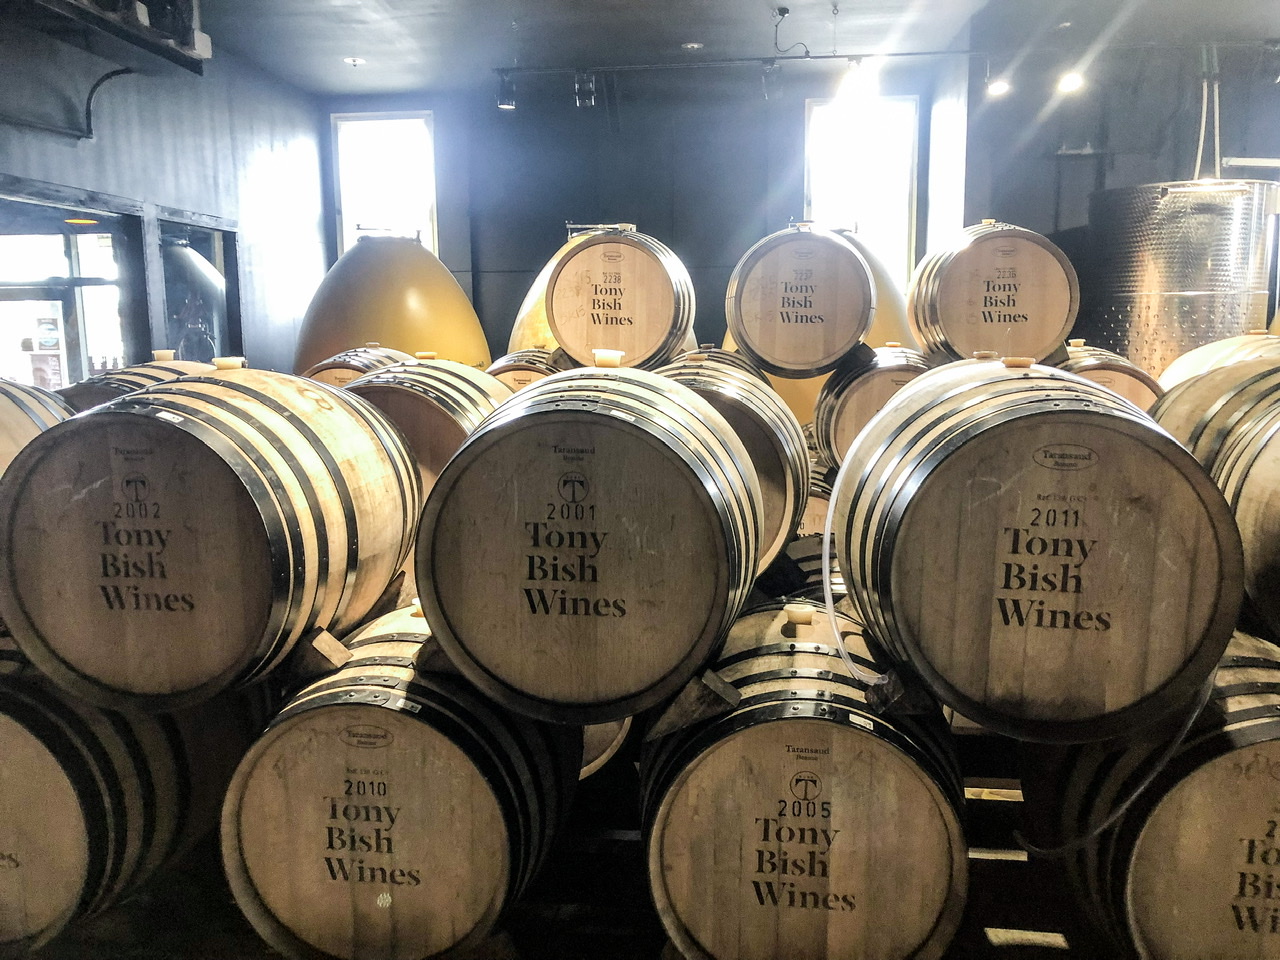 Interior of barrel room at Tony Bish Wines, stacked two high and four rows deep